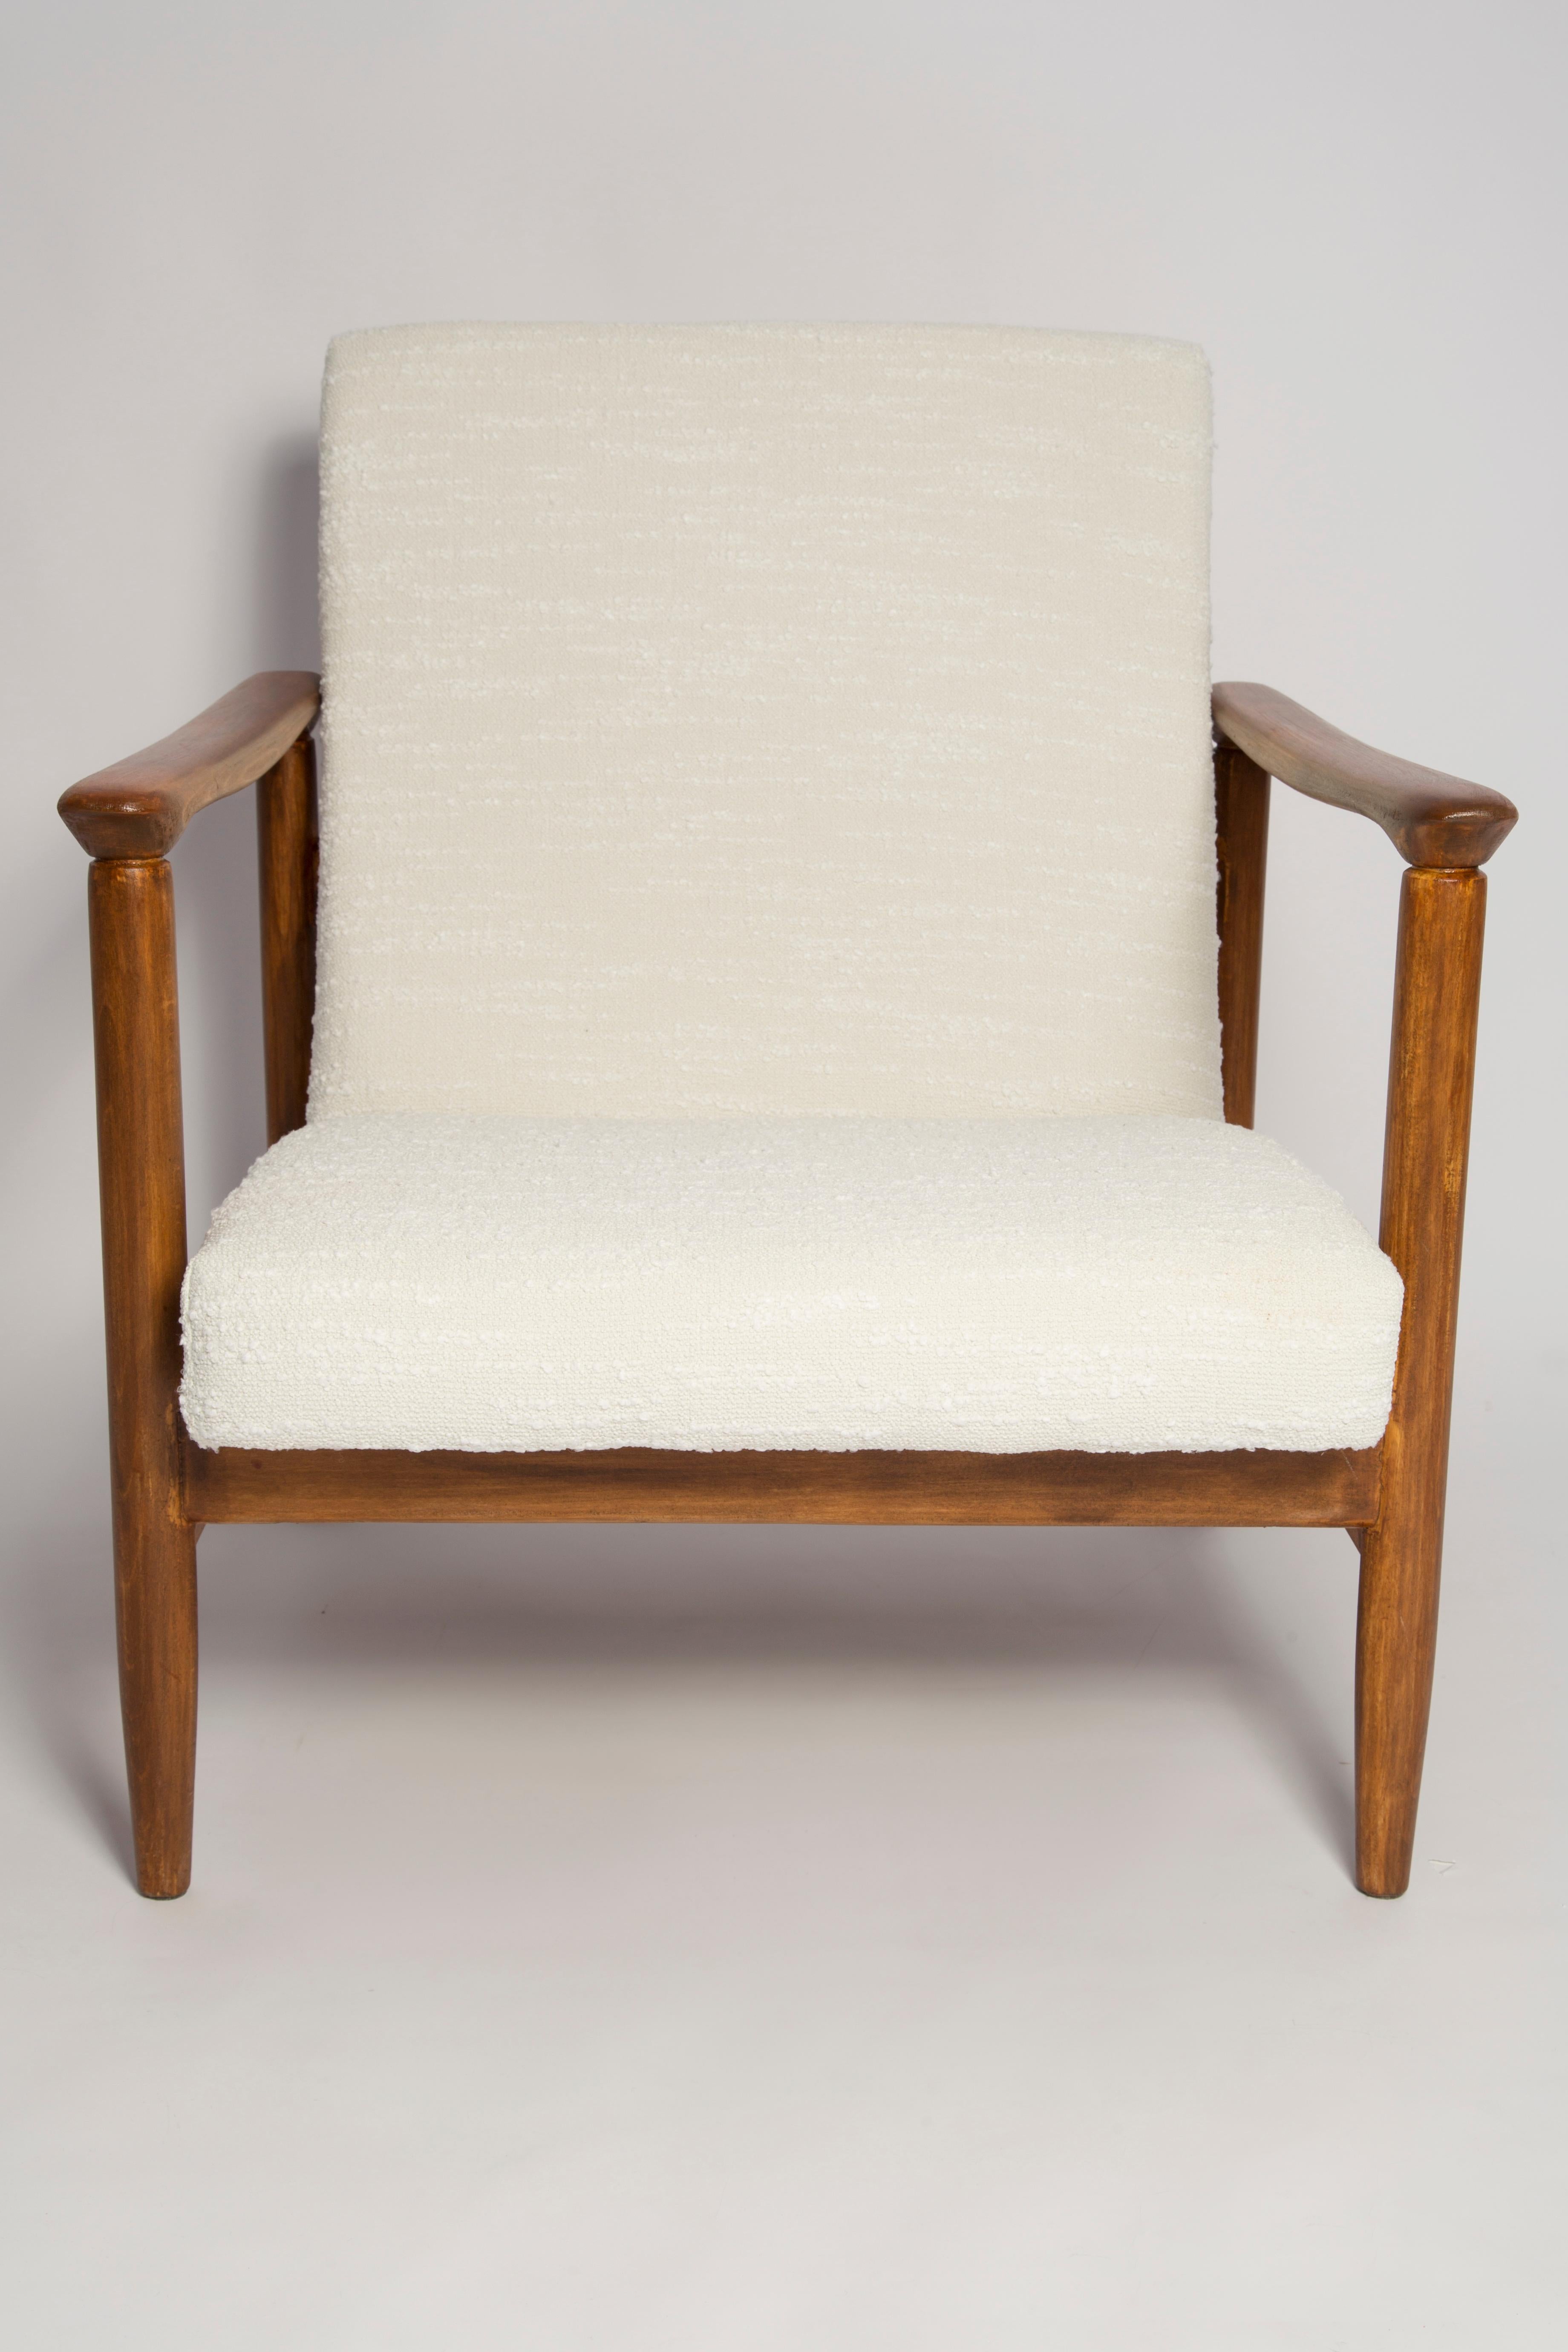 Pair of Mid Century White Boucle Armchairs, GFM 142, Edmund Homa, Europe, 1960s For Sale 5